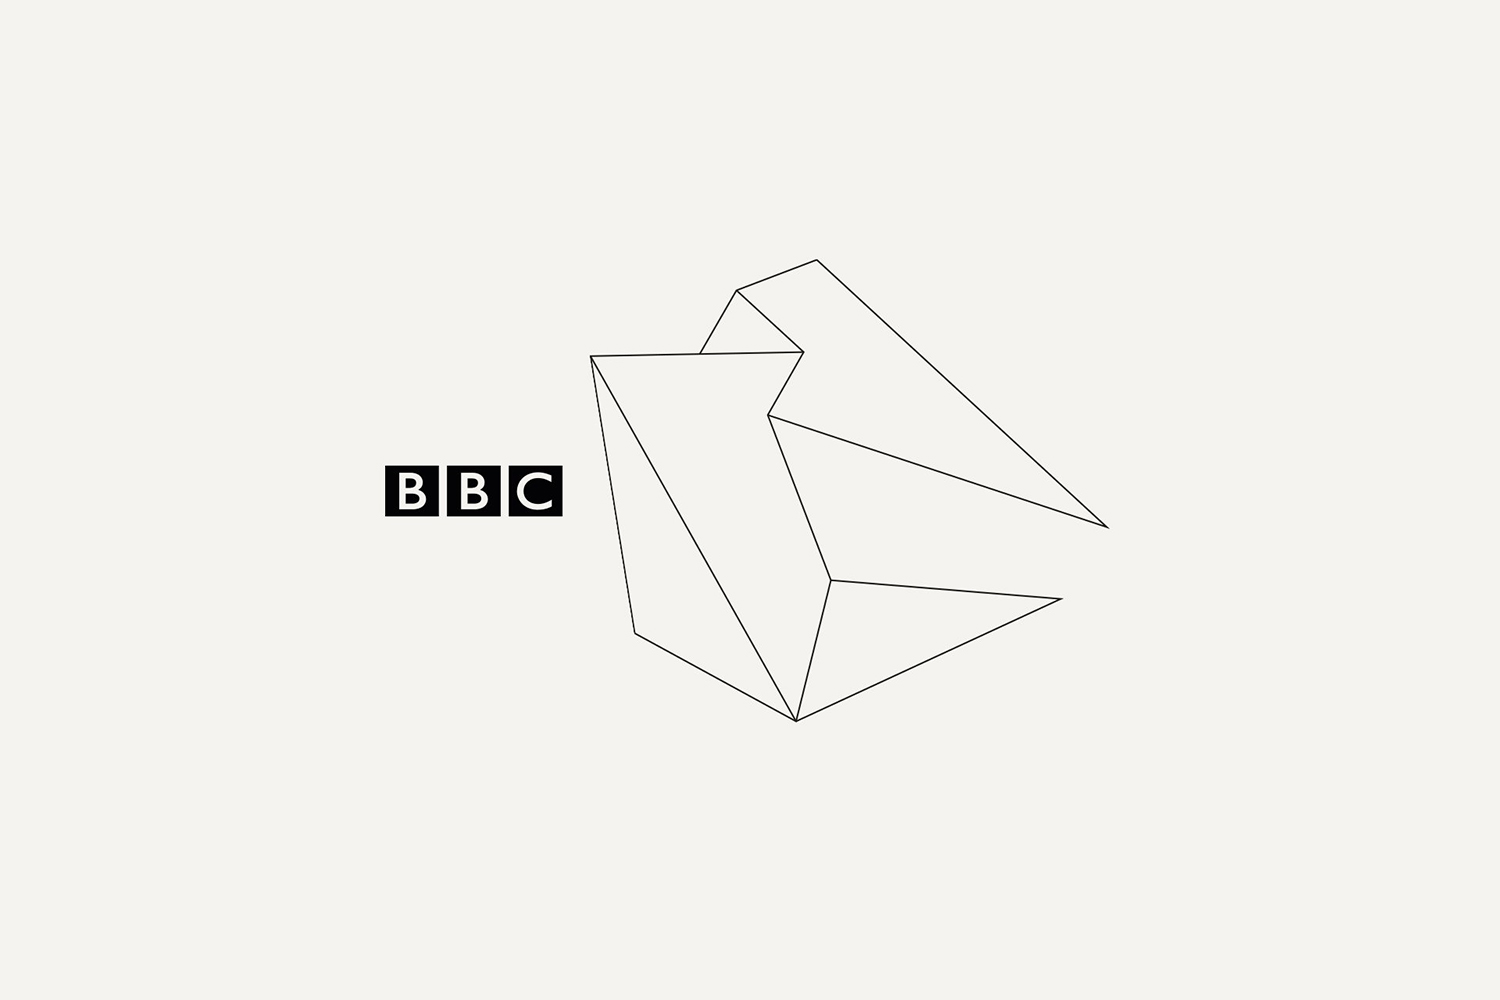 Graphic identity designed by London-based studio Spin for the BBC's in-house creative team BBC Creative